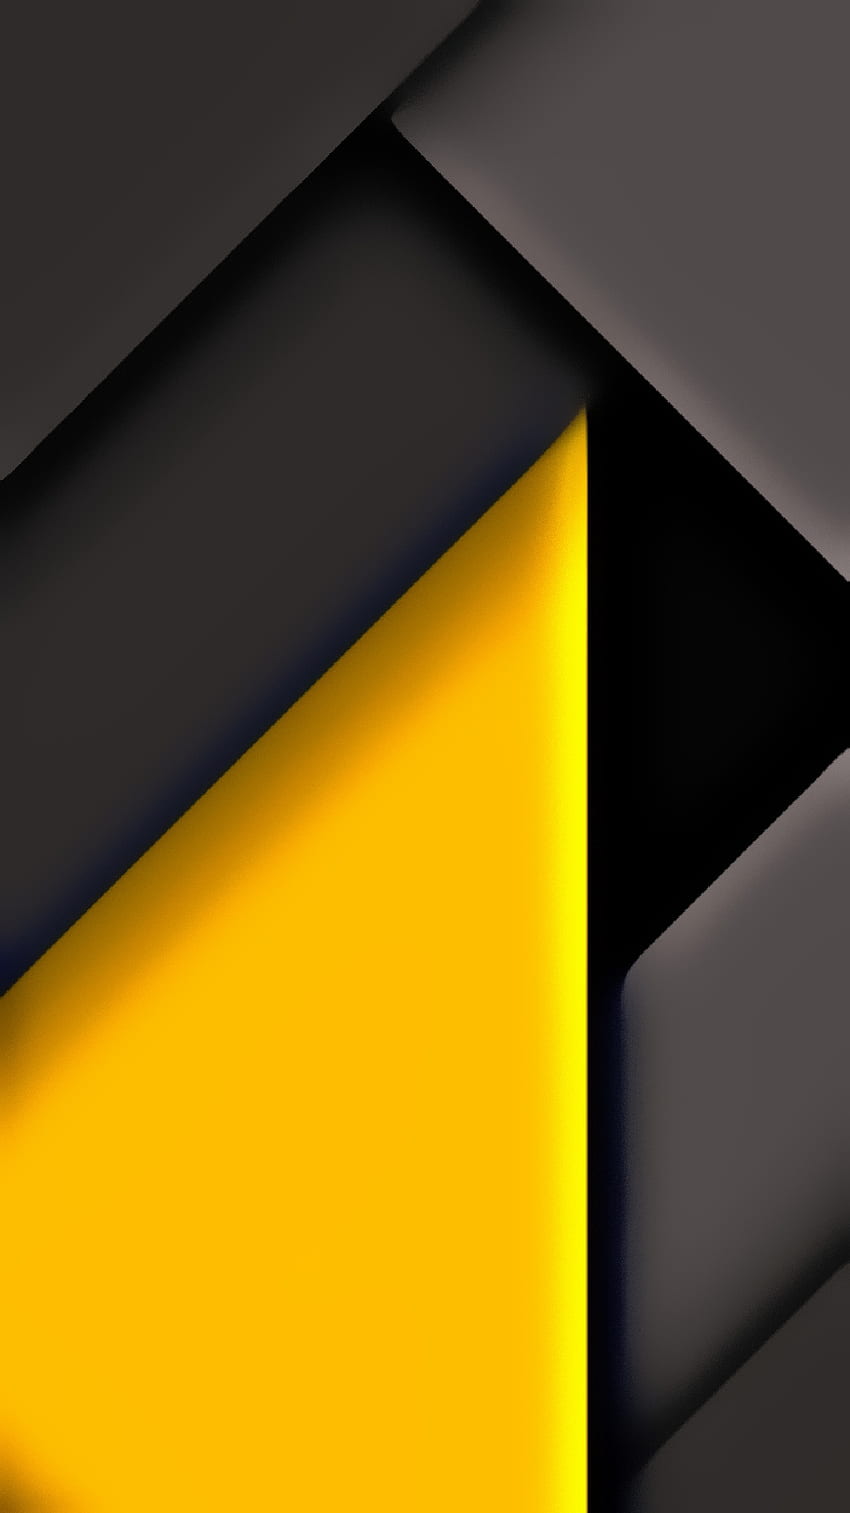 55900 Black And Yellow Background Stock Videos and RoyaltyFree Footage   iStock  Abstract black and yellow background